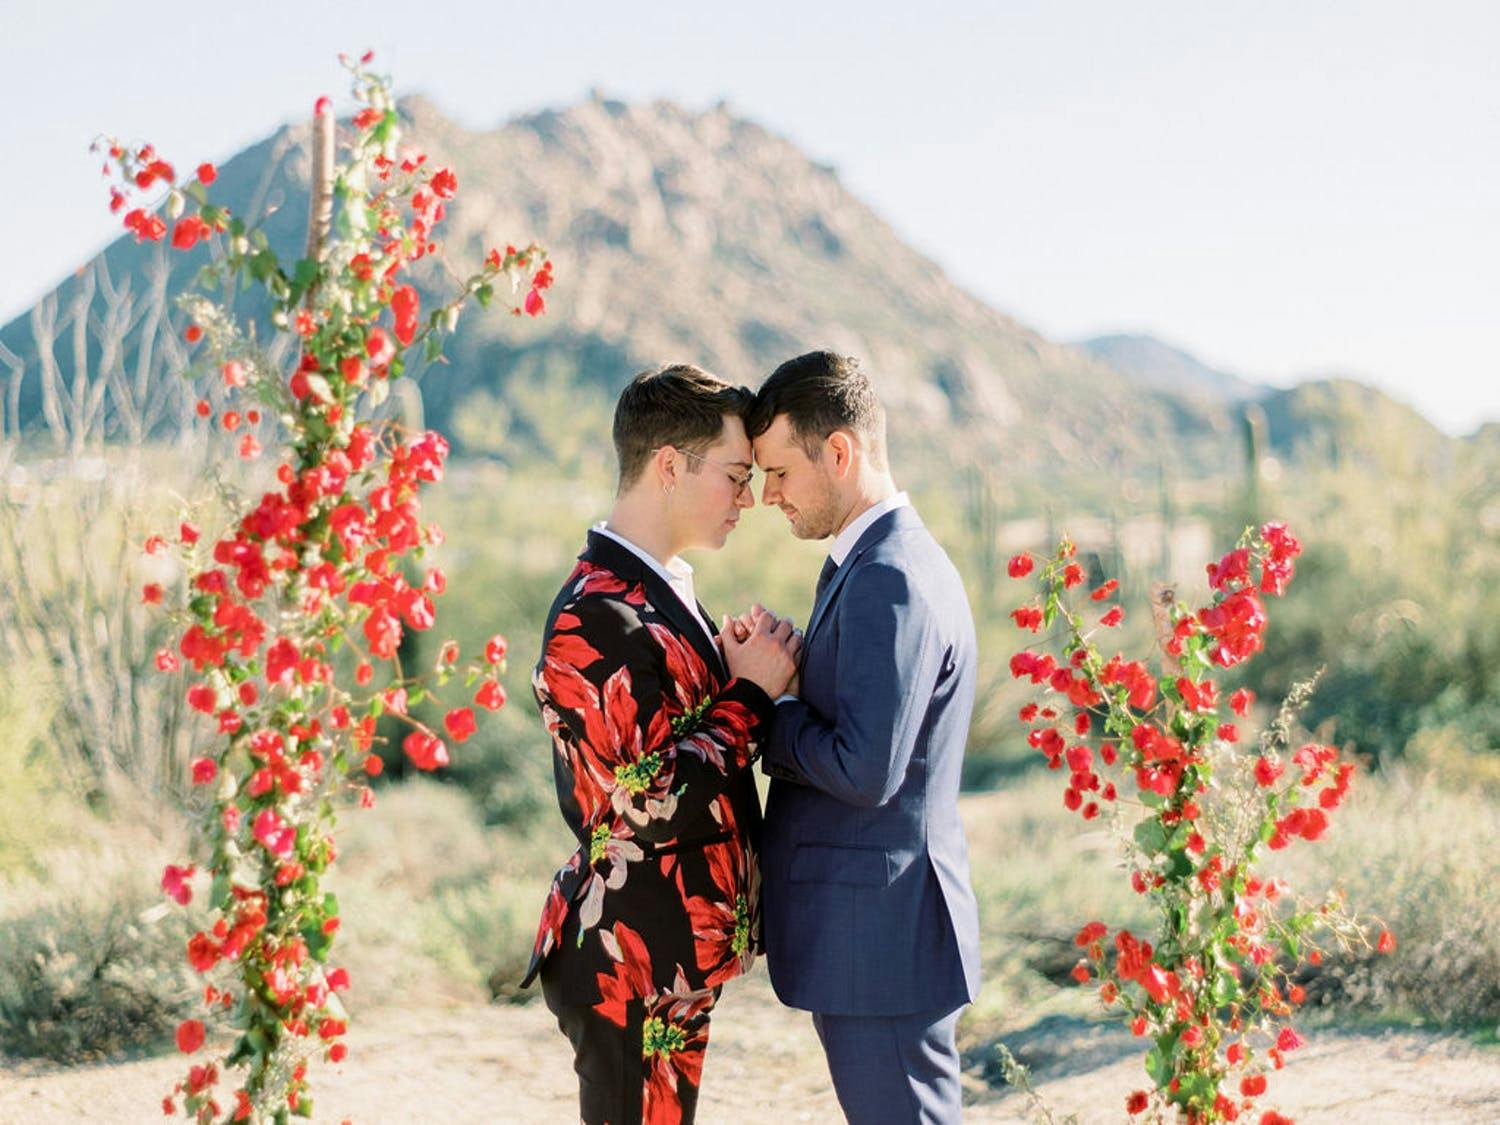 Two groom touch foreheads between Bougainvillea vines at desert wedding in Scottsdale, AZ | PartySlate